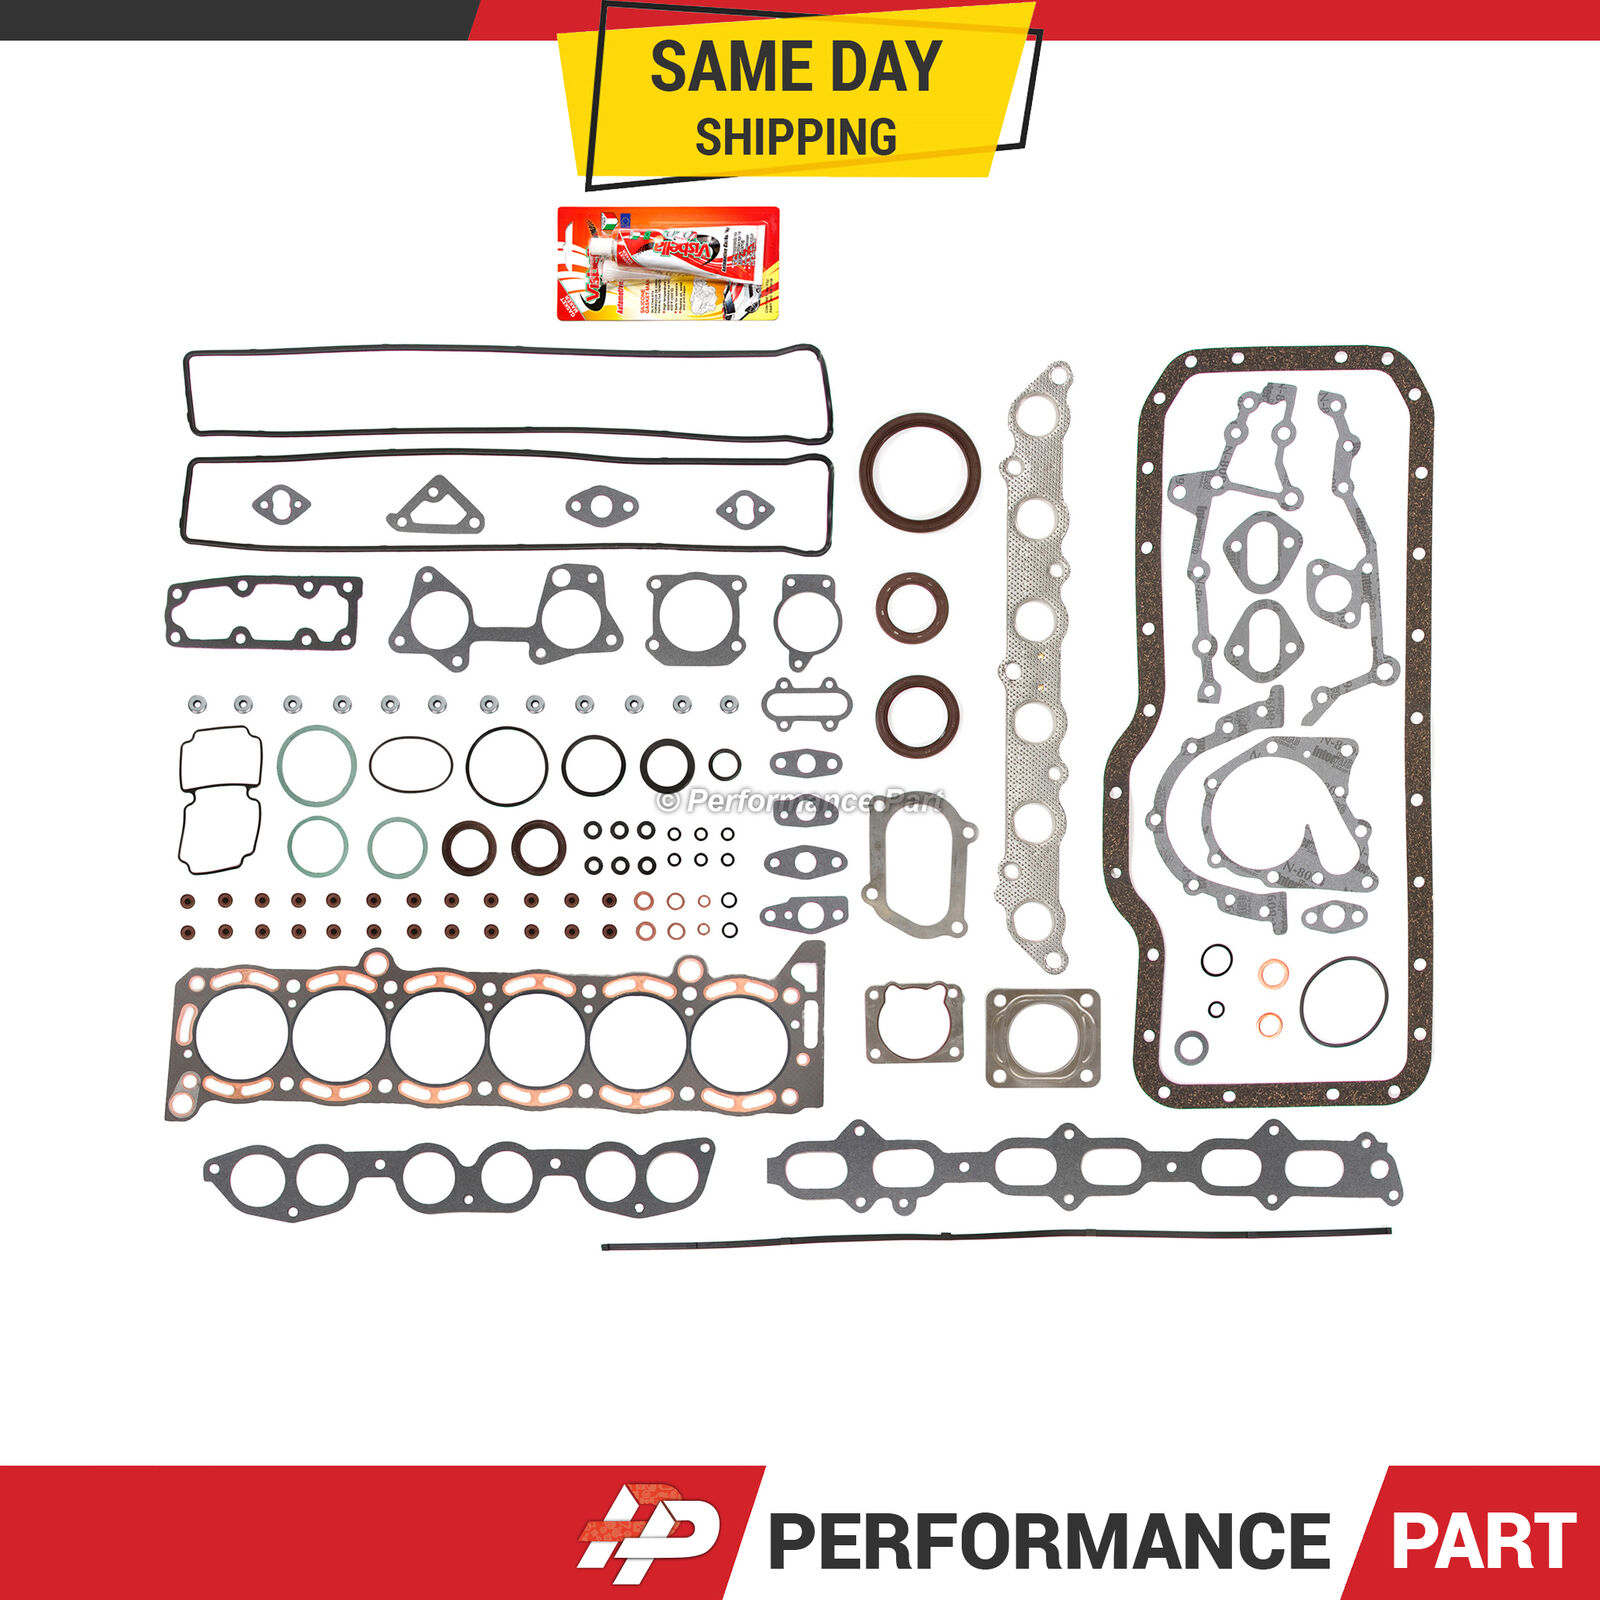 Full Gasket Set for 86-93 Toyota Supra Turbo 3.0L 7MGTE